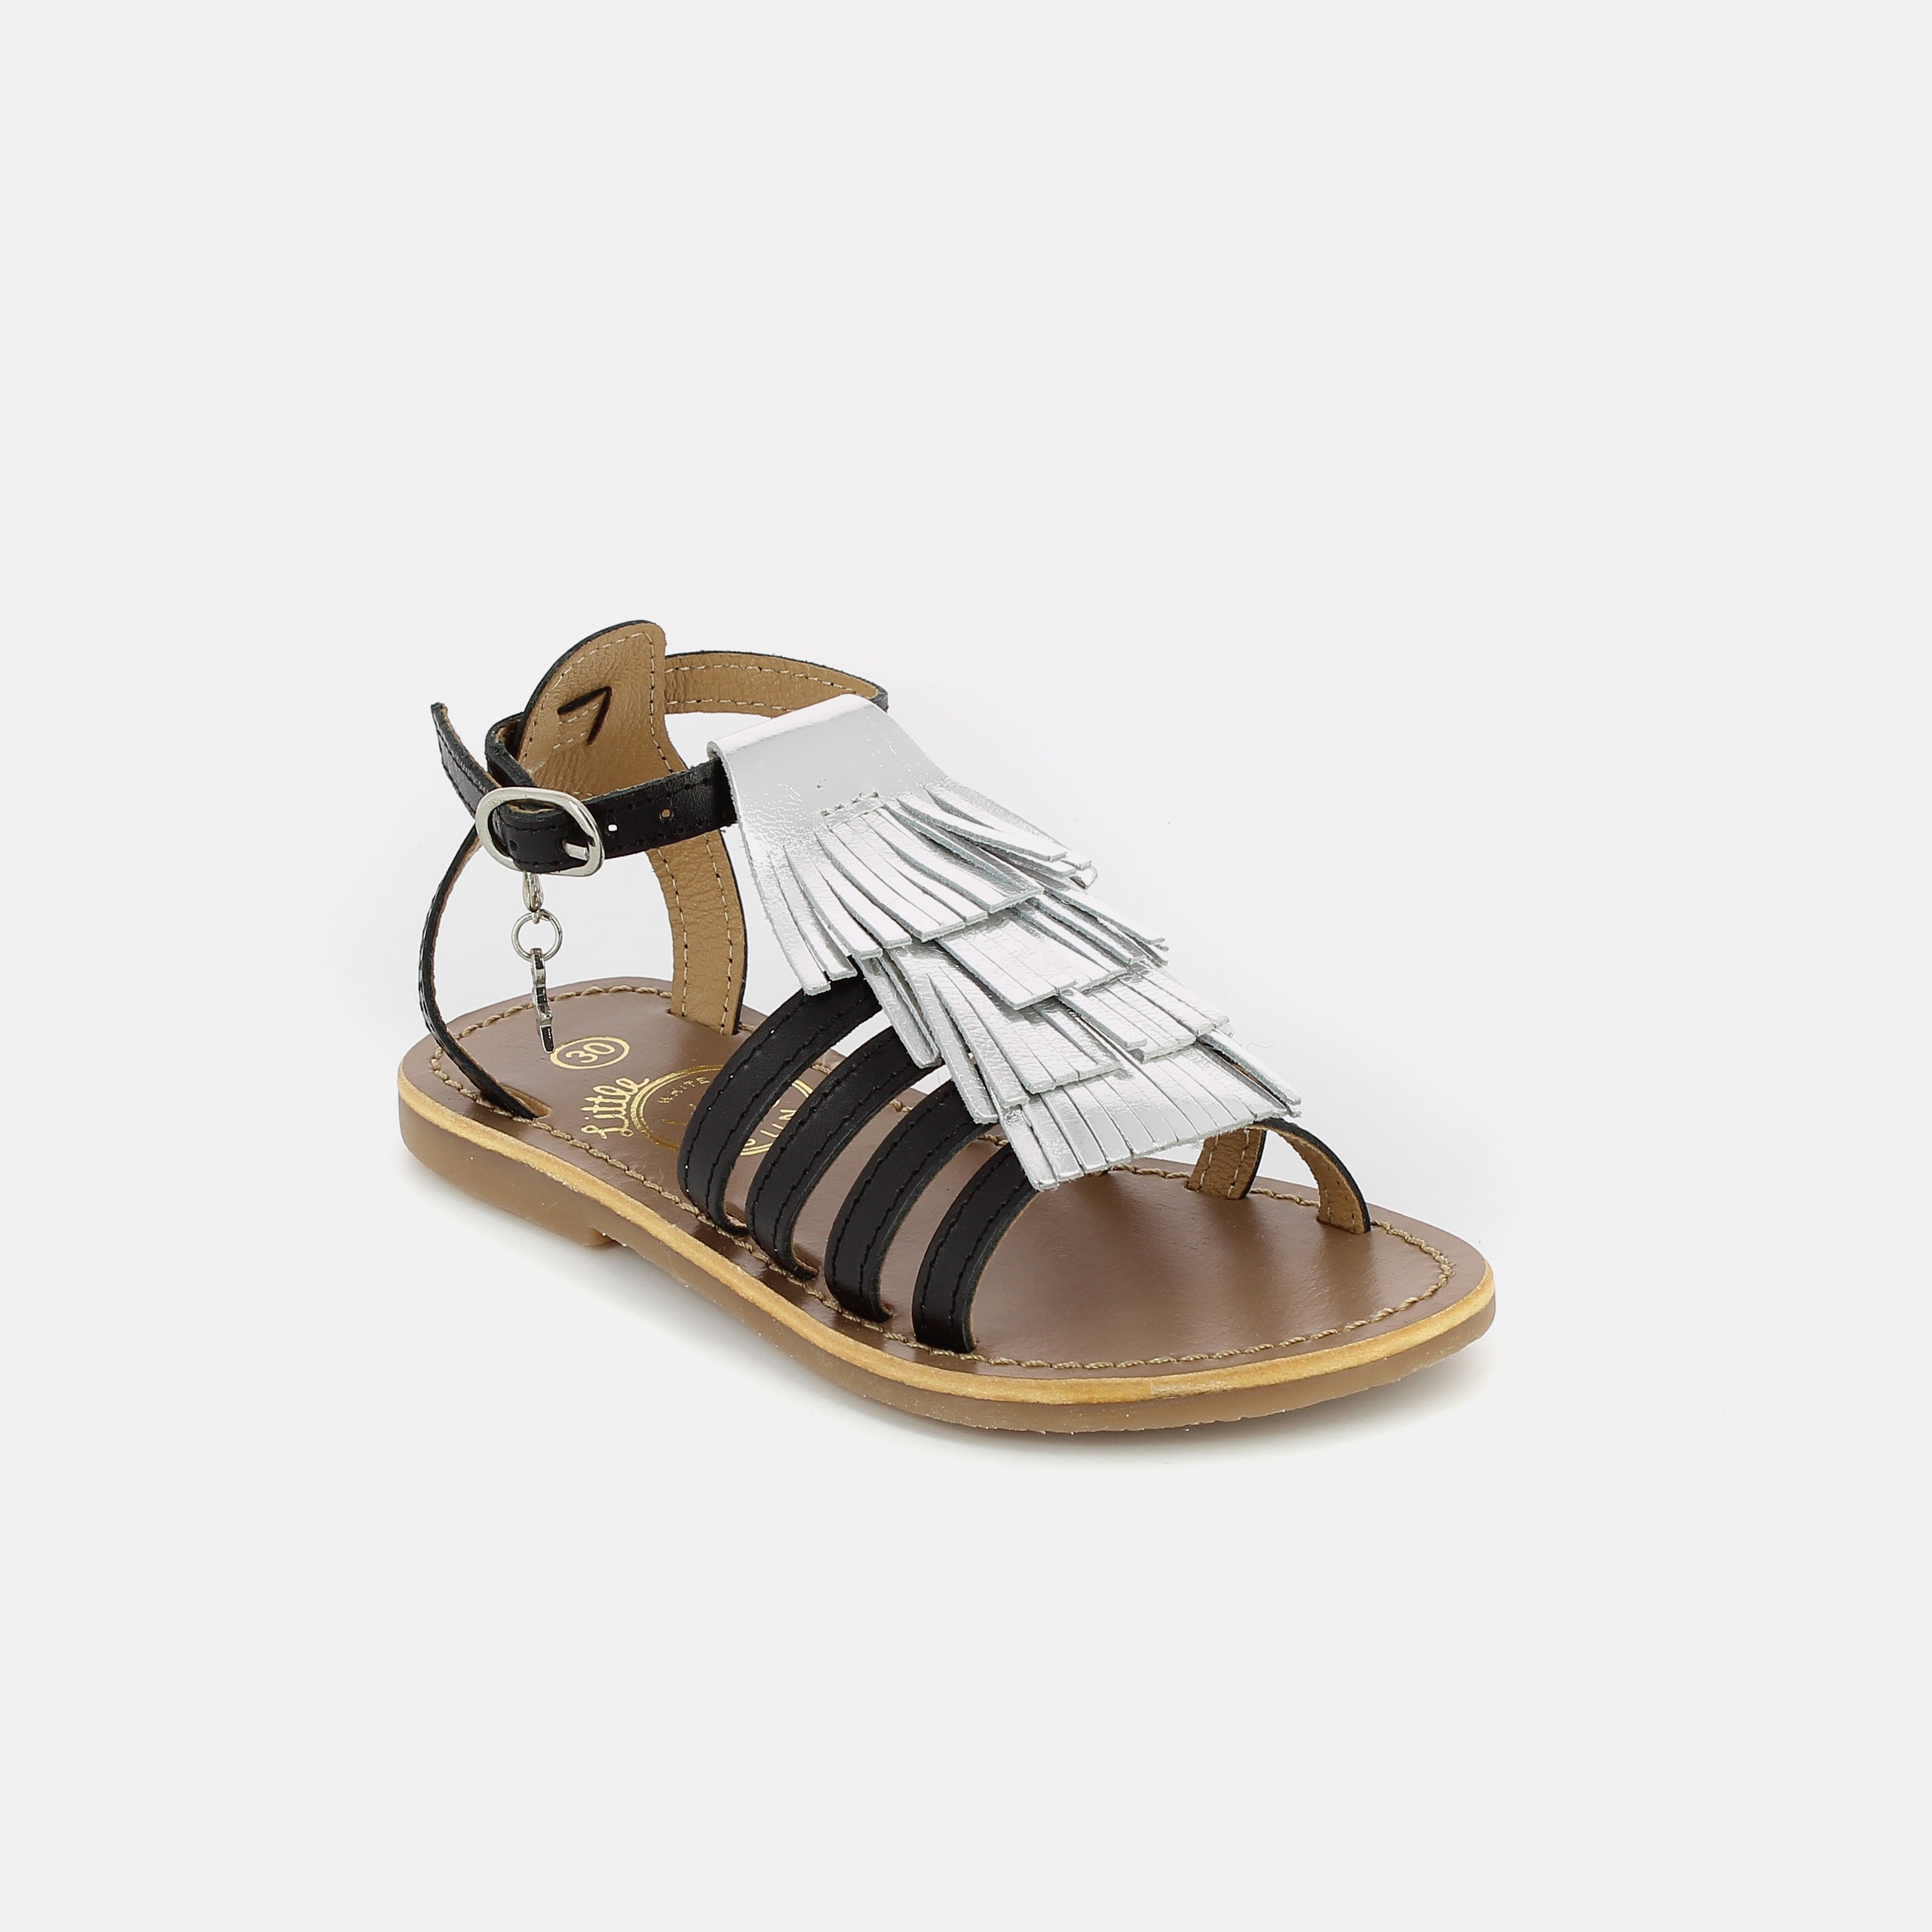 Girls Black & Silver Leather Sandals